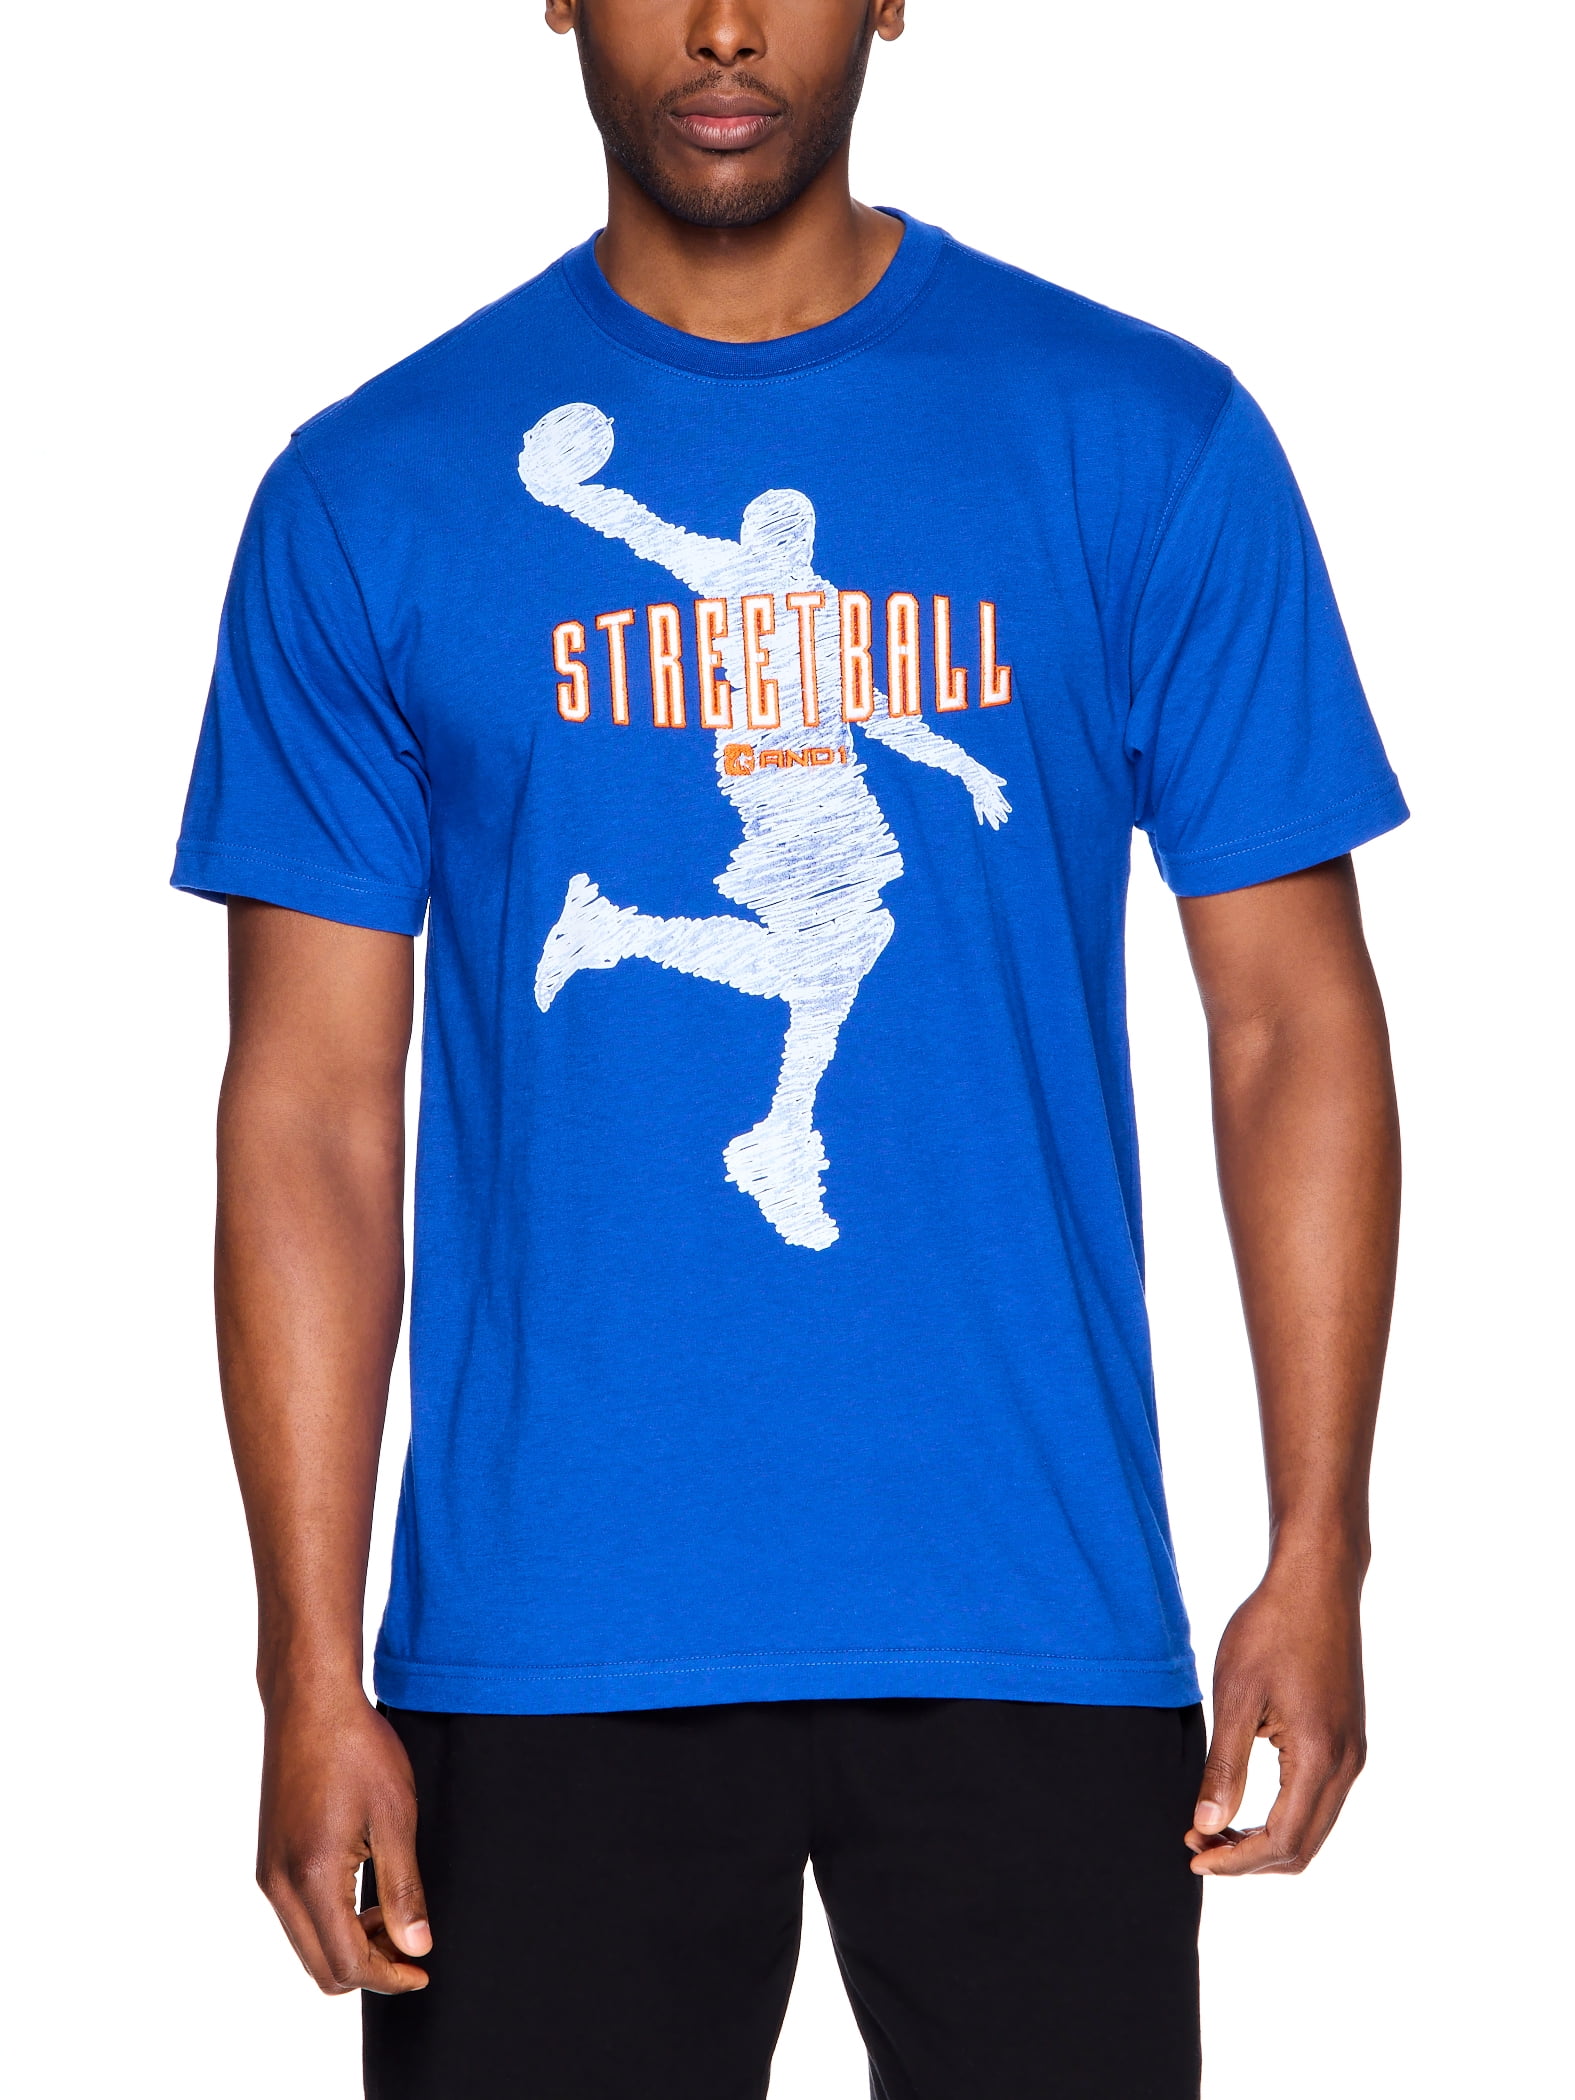 And1 Mens "Streetball" Graphic Tee